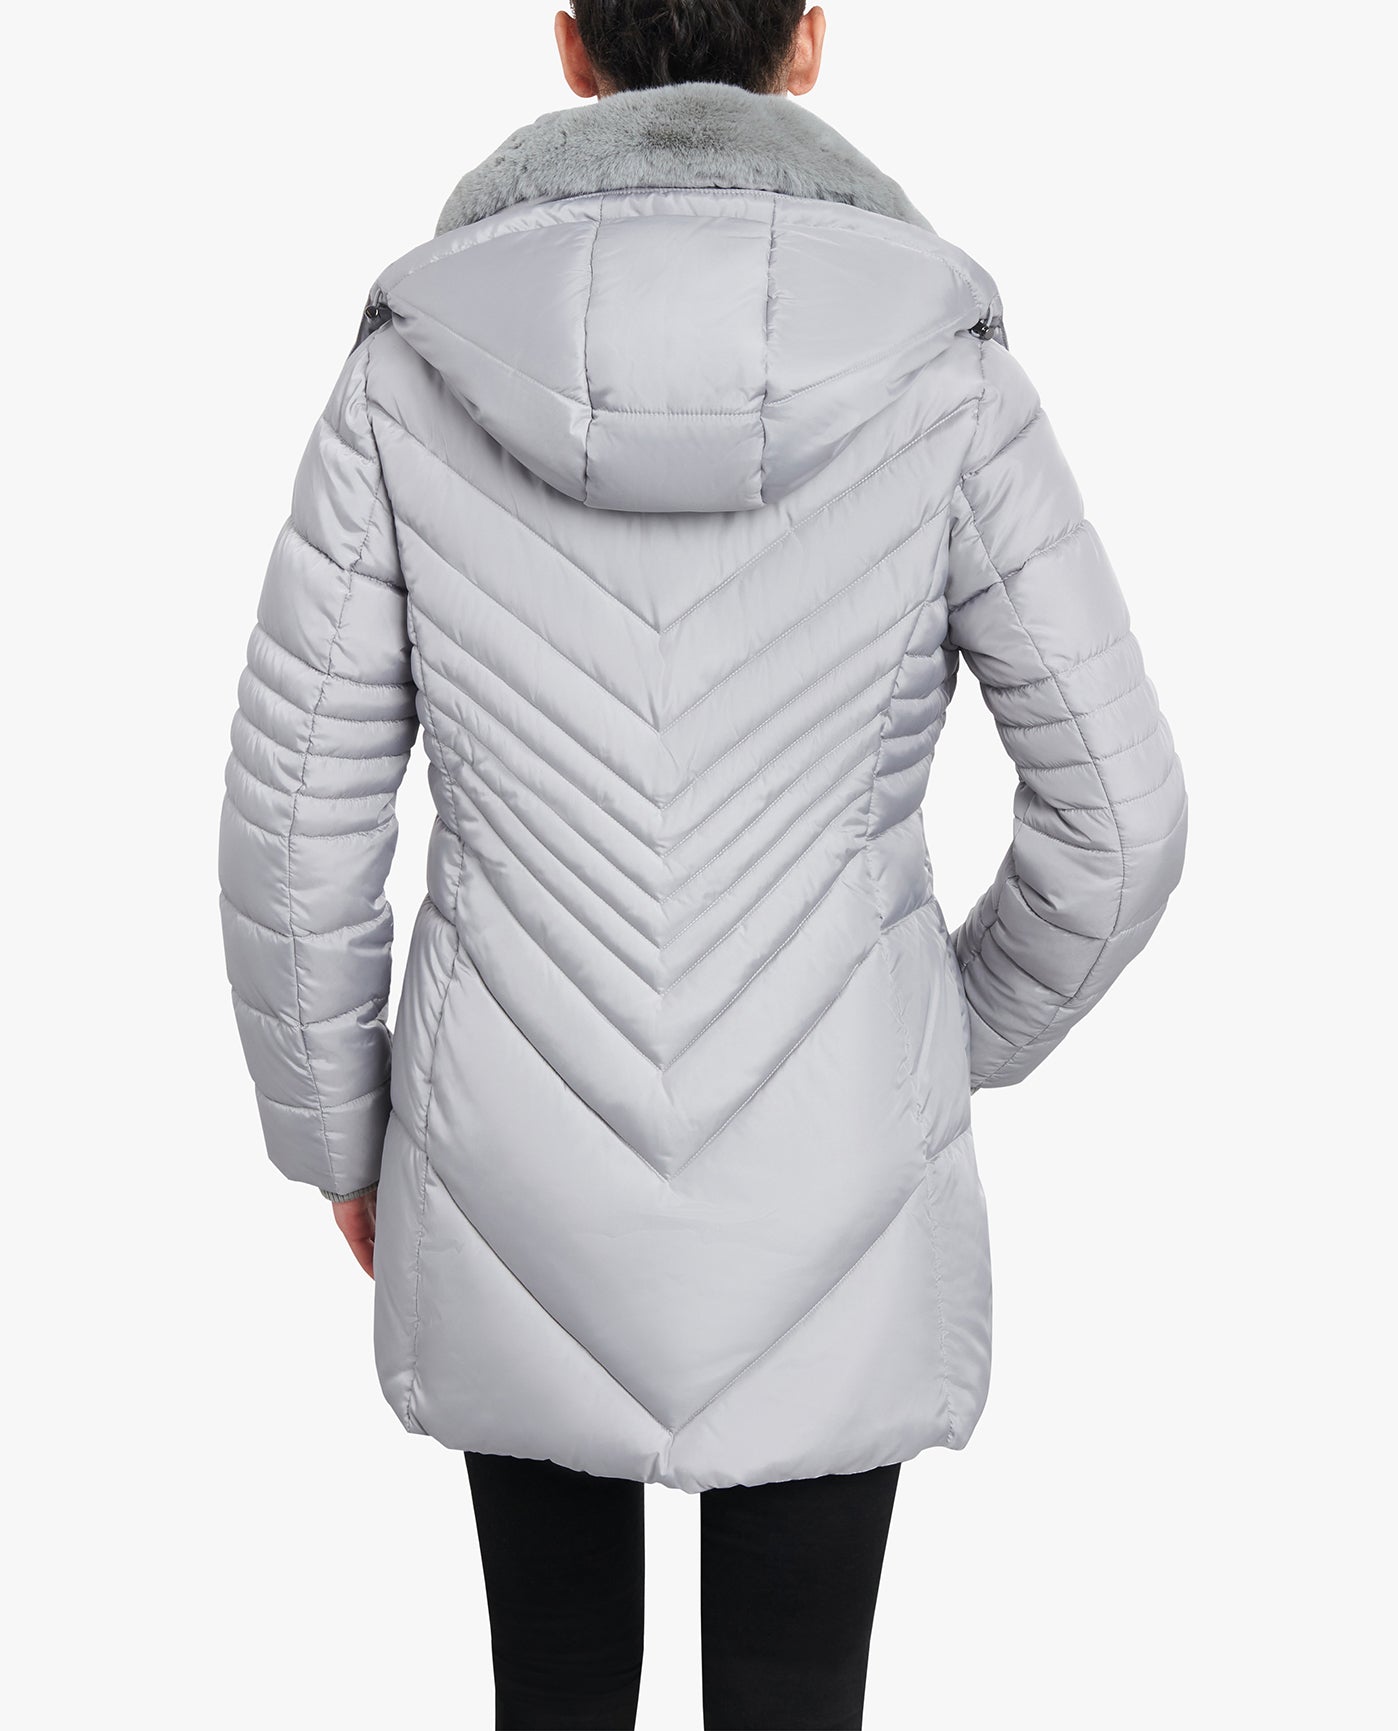 BACK VIEW OF ZIP-FRONT HOODED PUFFER JACKET WITH BUTTON-OFF FUR COLLAR | PEARL GREY